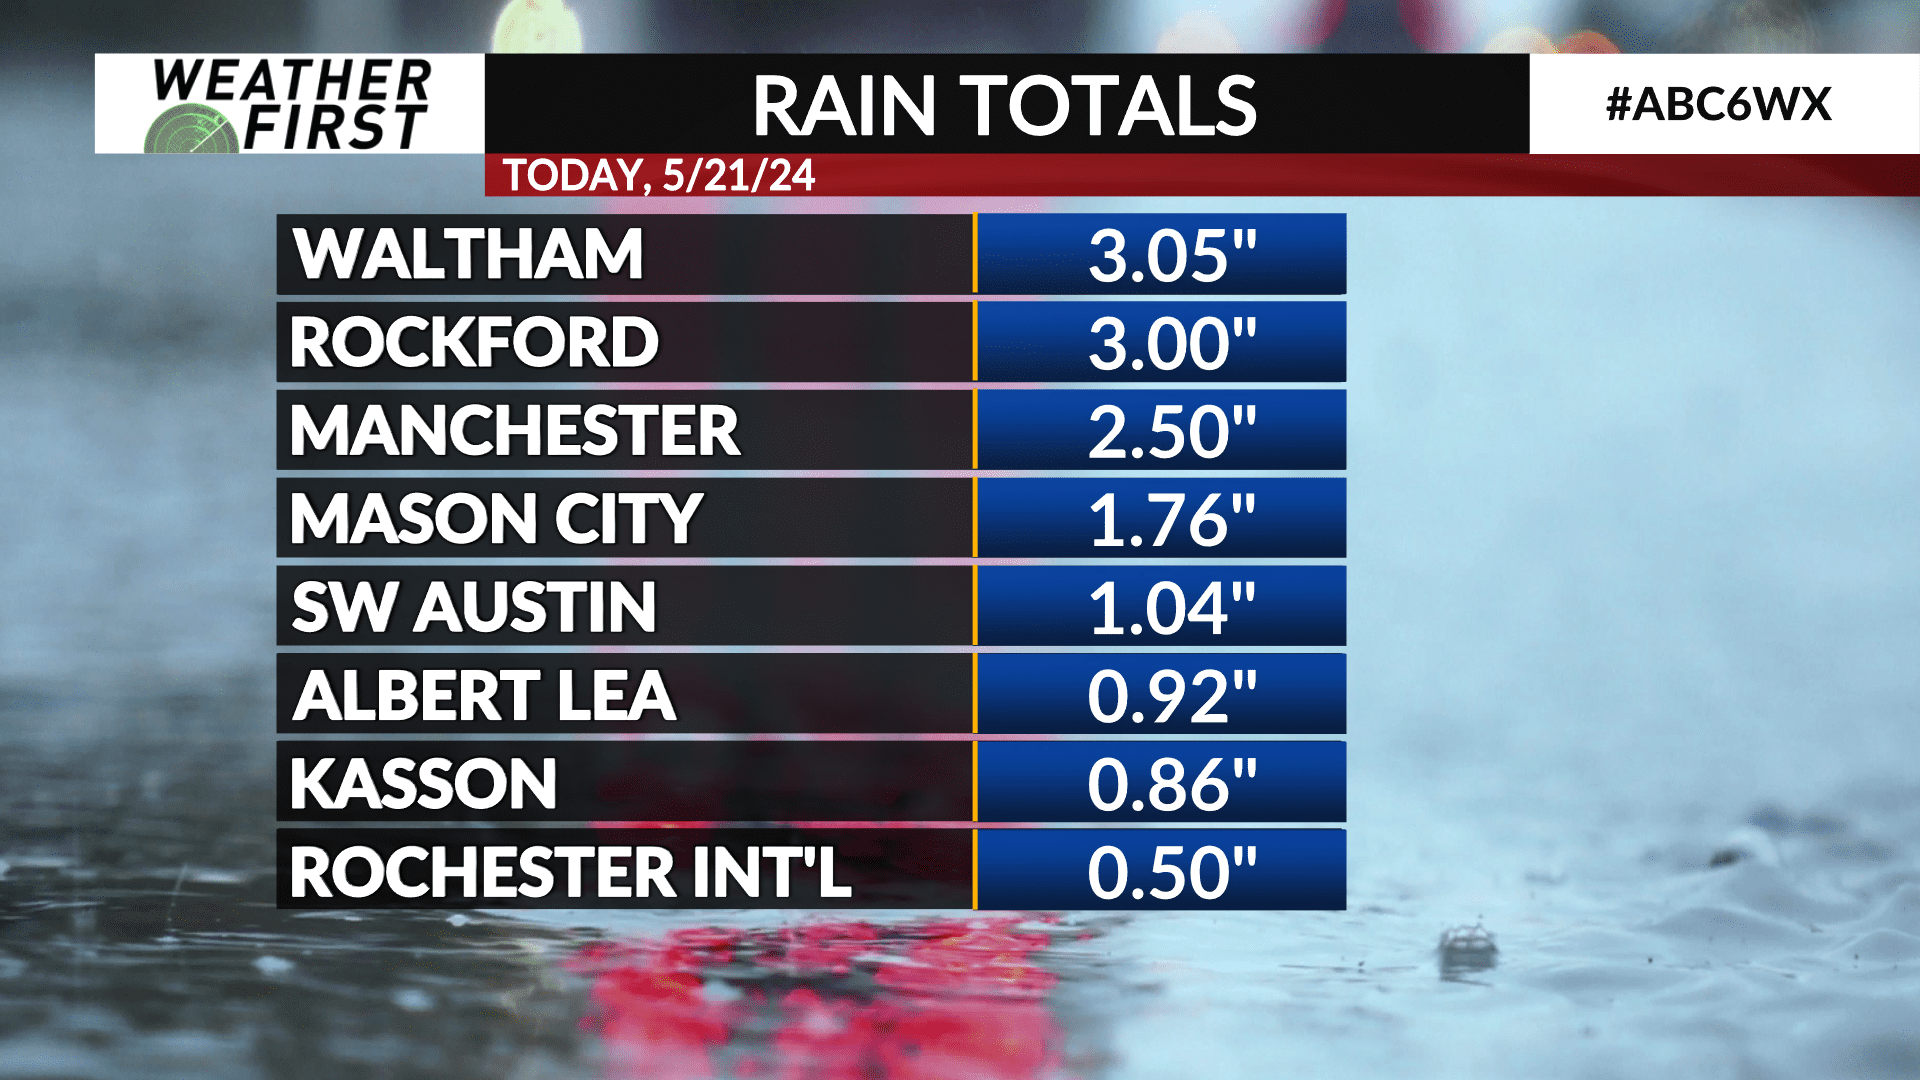 A handful of Tuesday rainfall totals